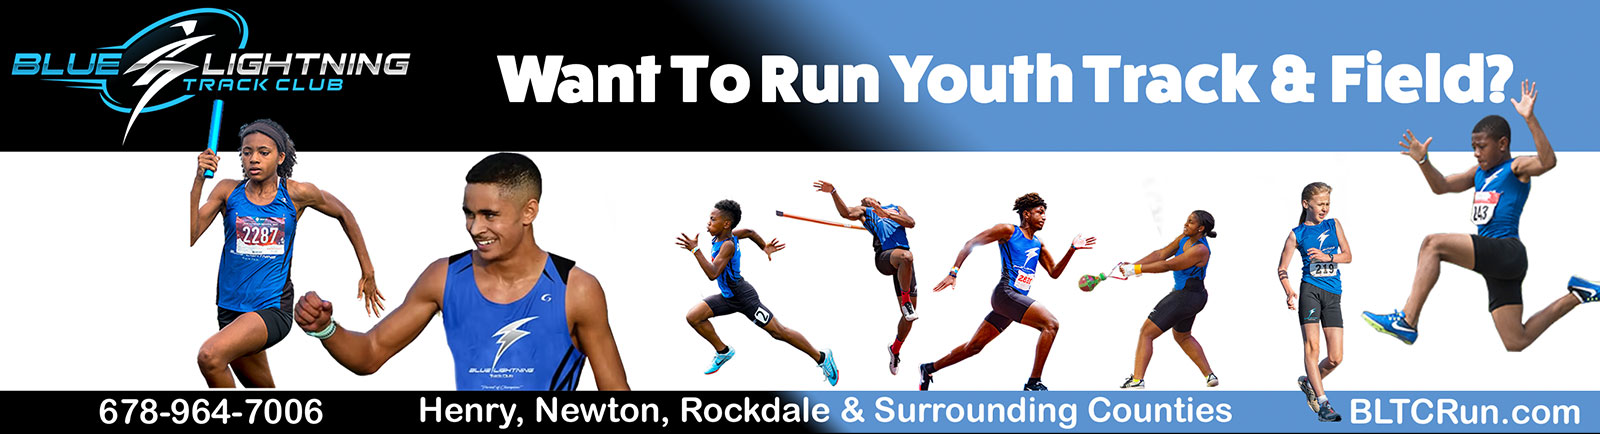 https://bluelightningtrack.com/wp-content/uploads/2019/10/1-Want-To-Run-Youth-Track-and-Field.jpg